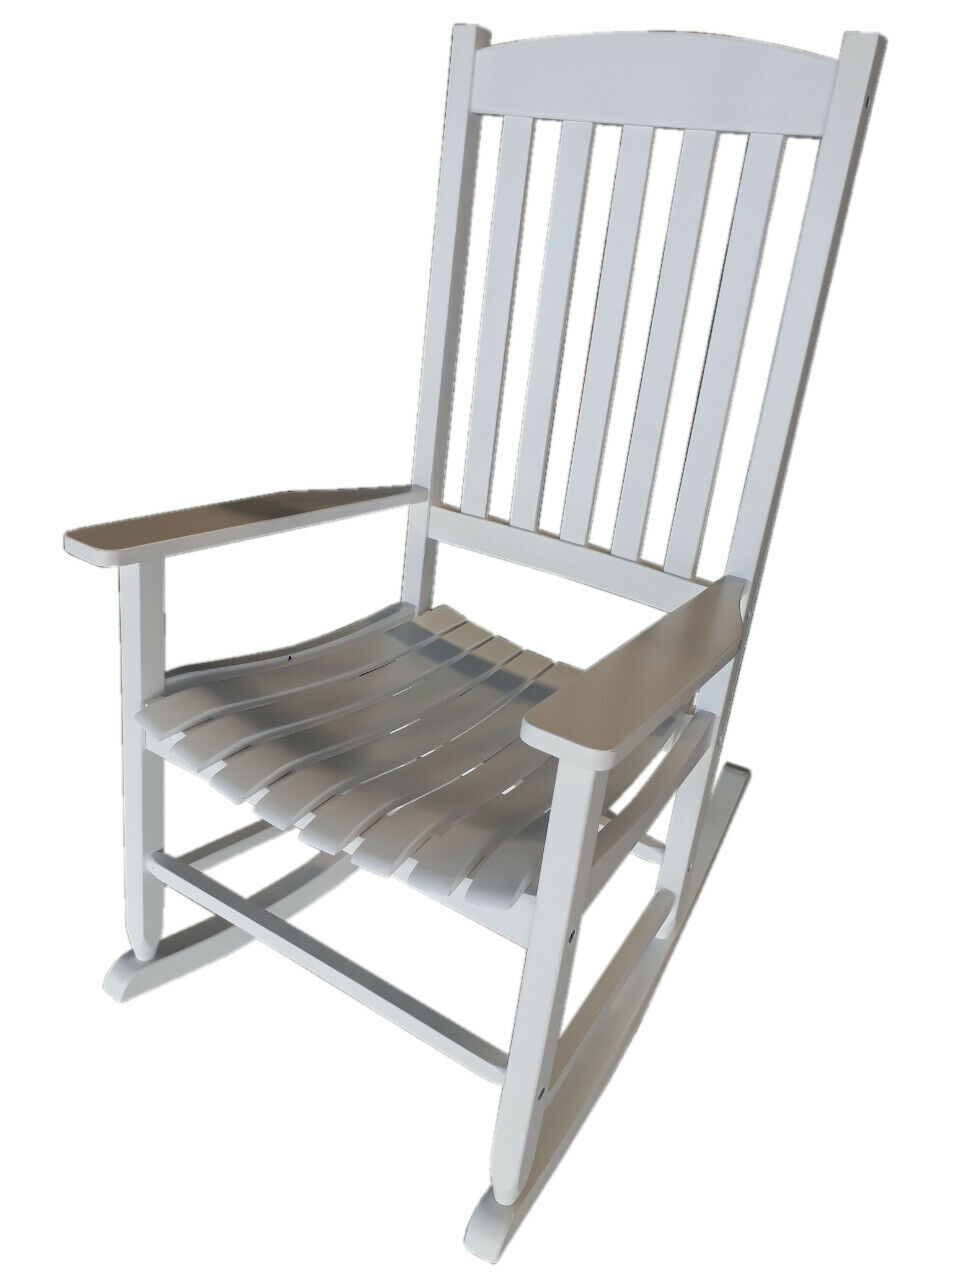 Outdoor Wood Porch Rocking Chair Wooden Rocker Weather Resistant Patio Furniture